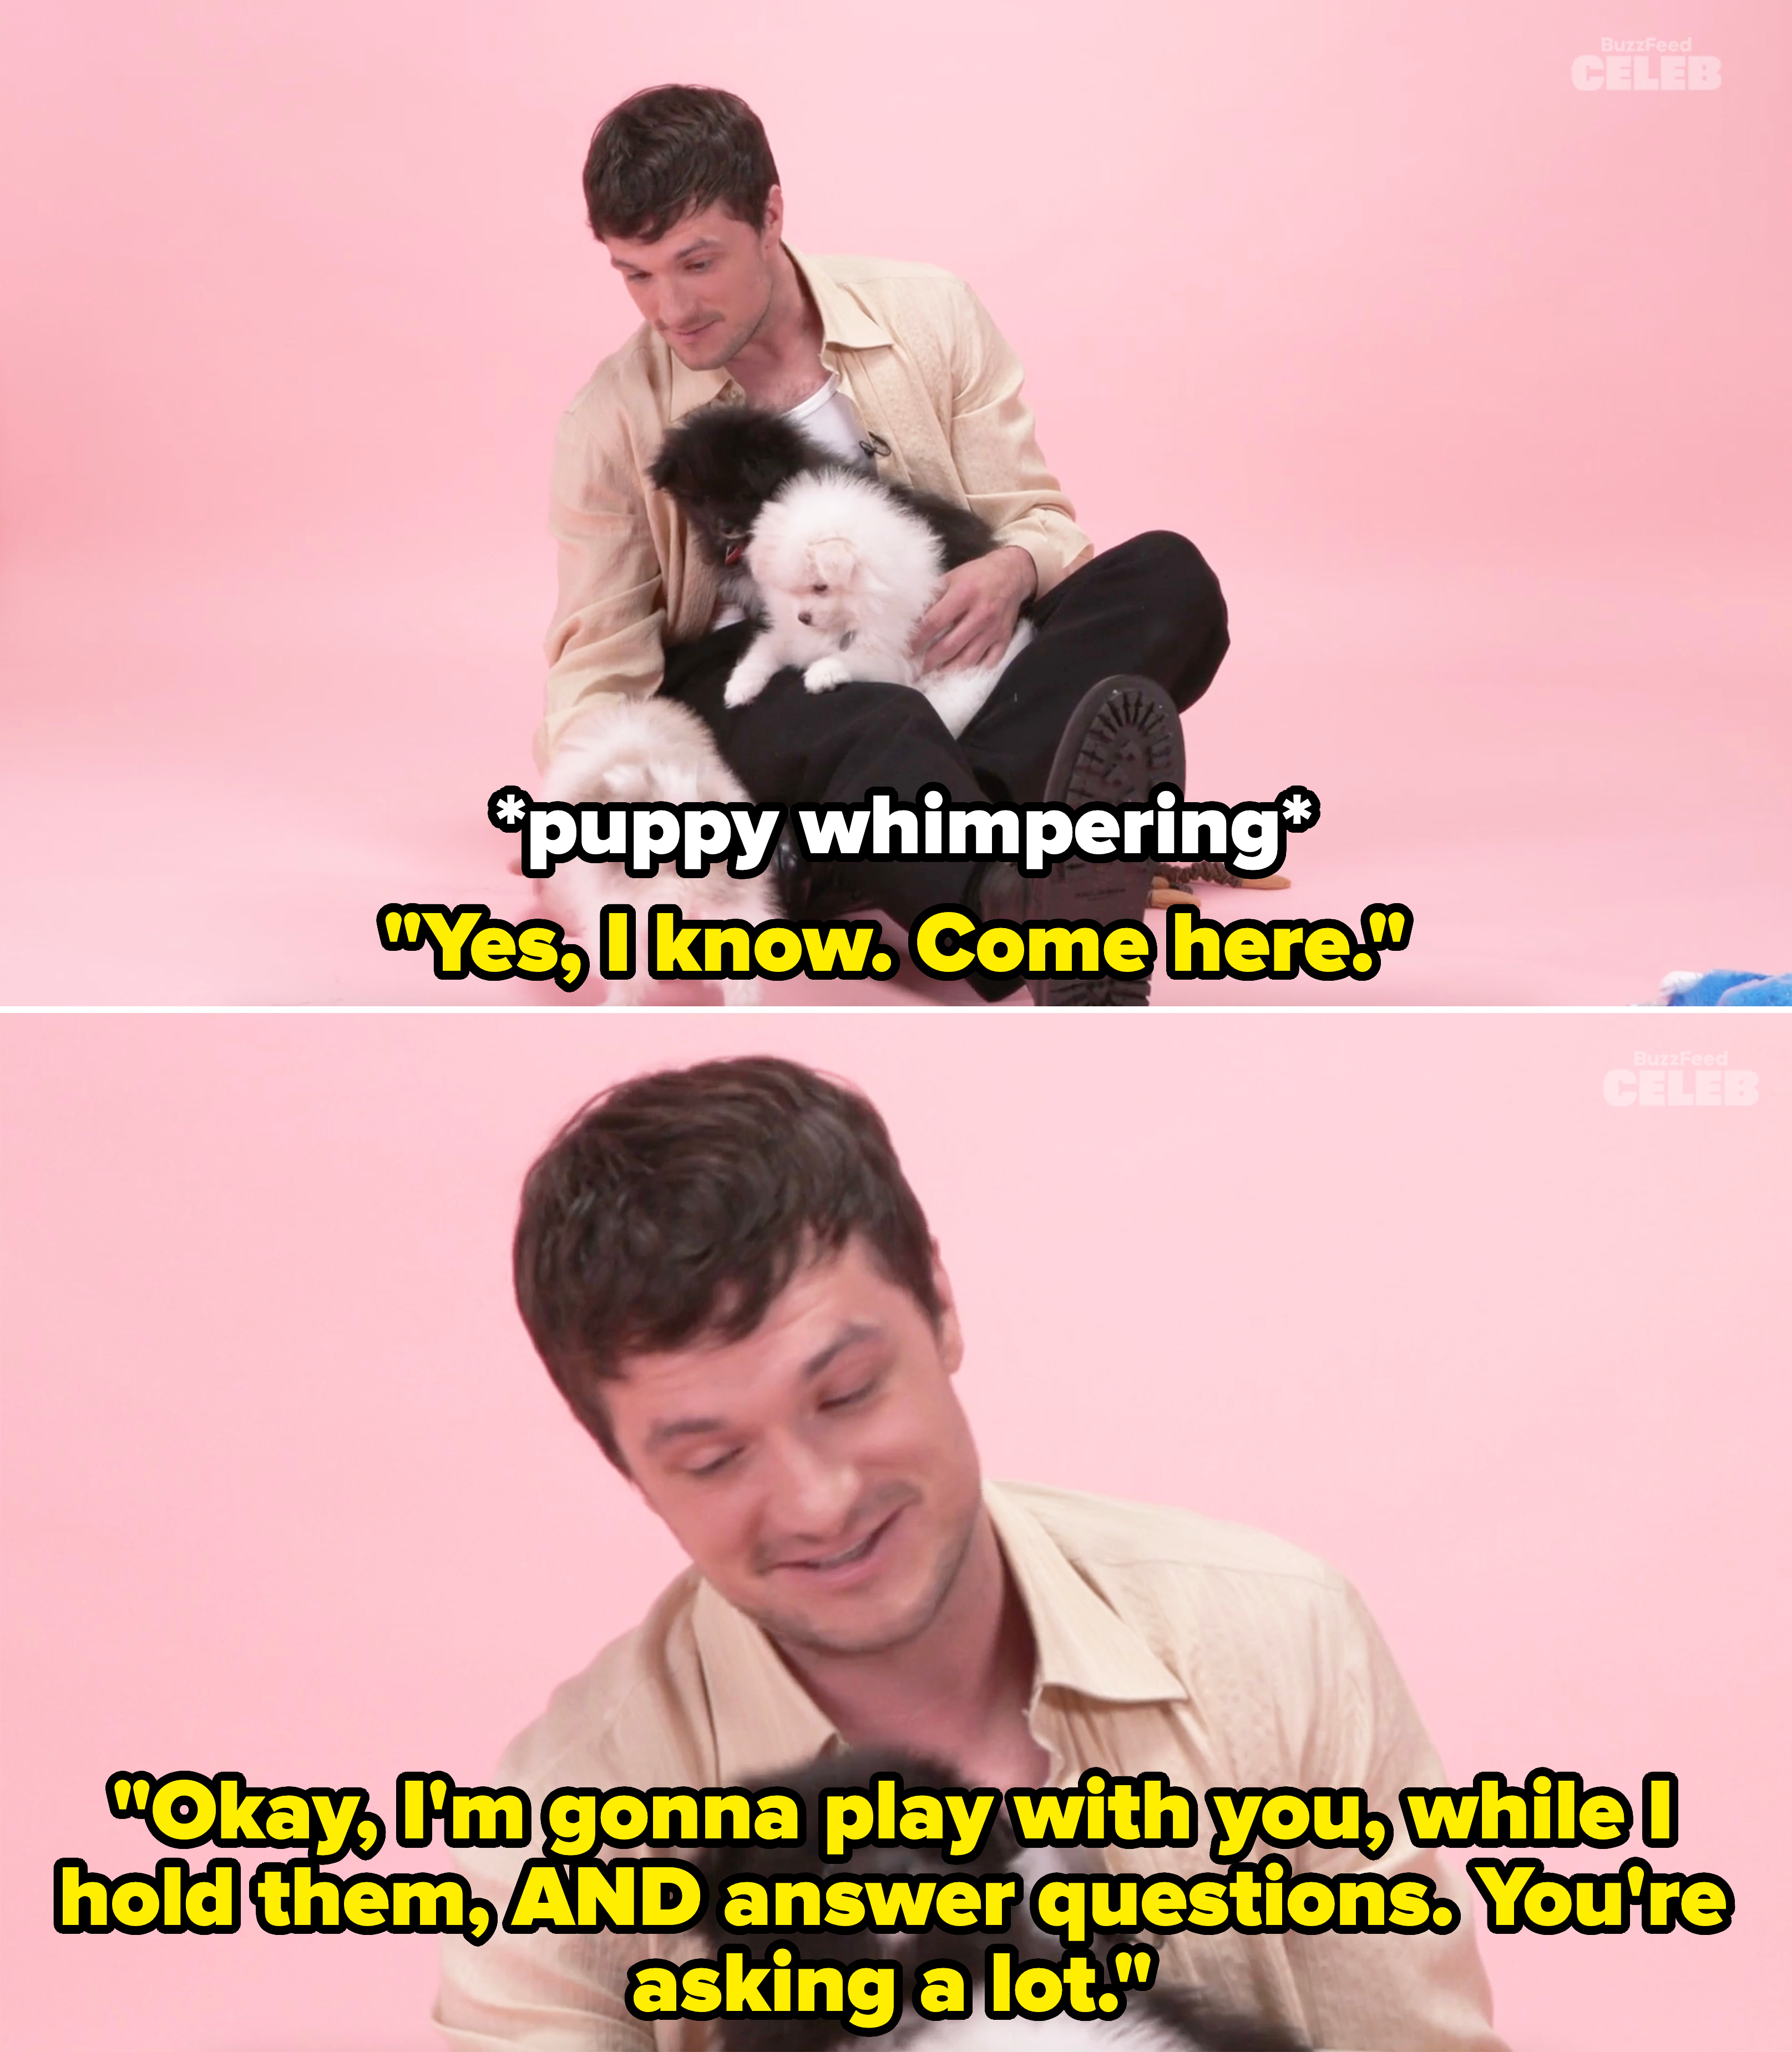 he tells the puppies, okay i&#x27;m gonna play with you while i hold them and answer questions, you&#x27;re asking a lot